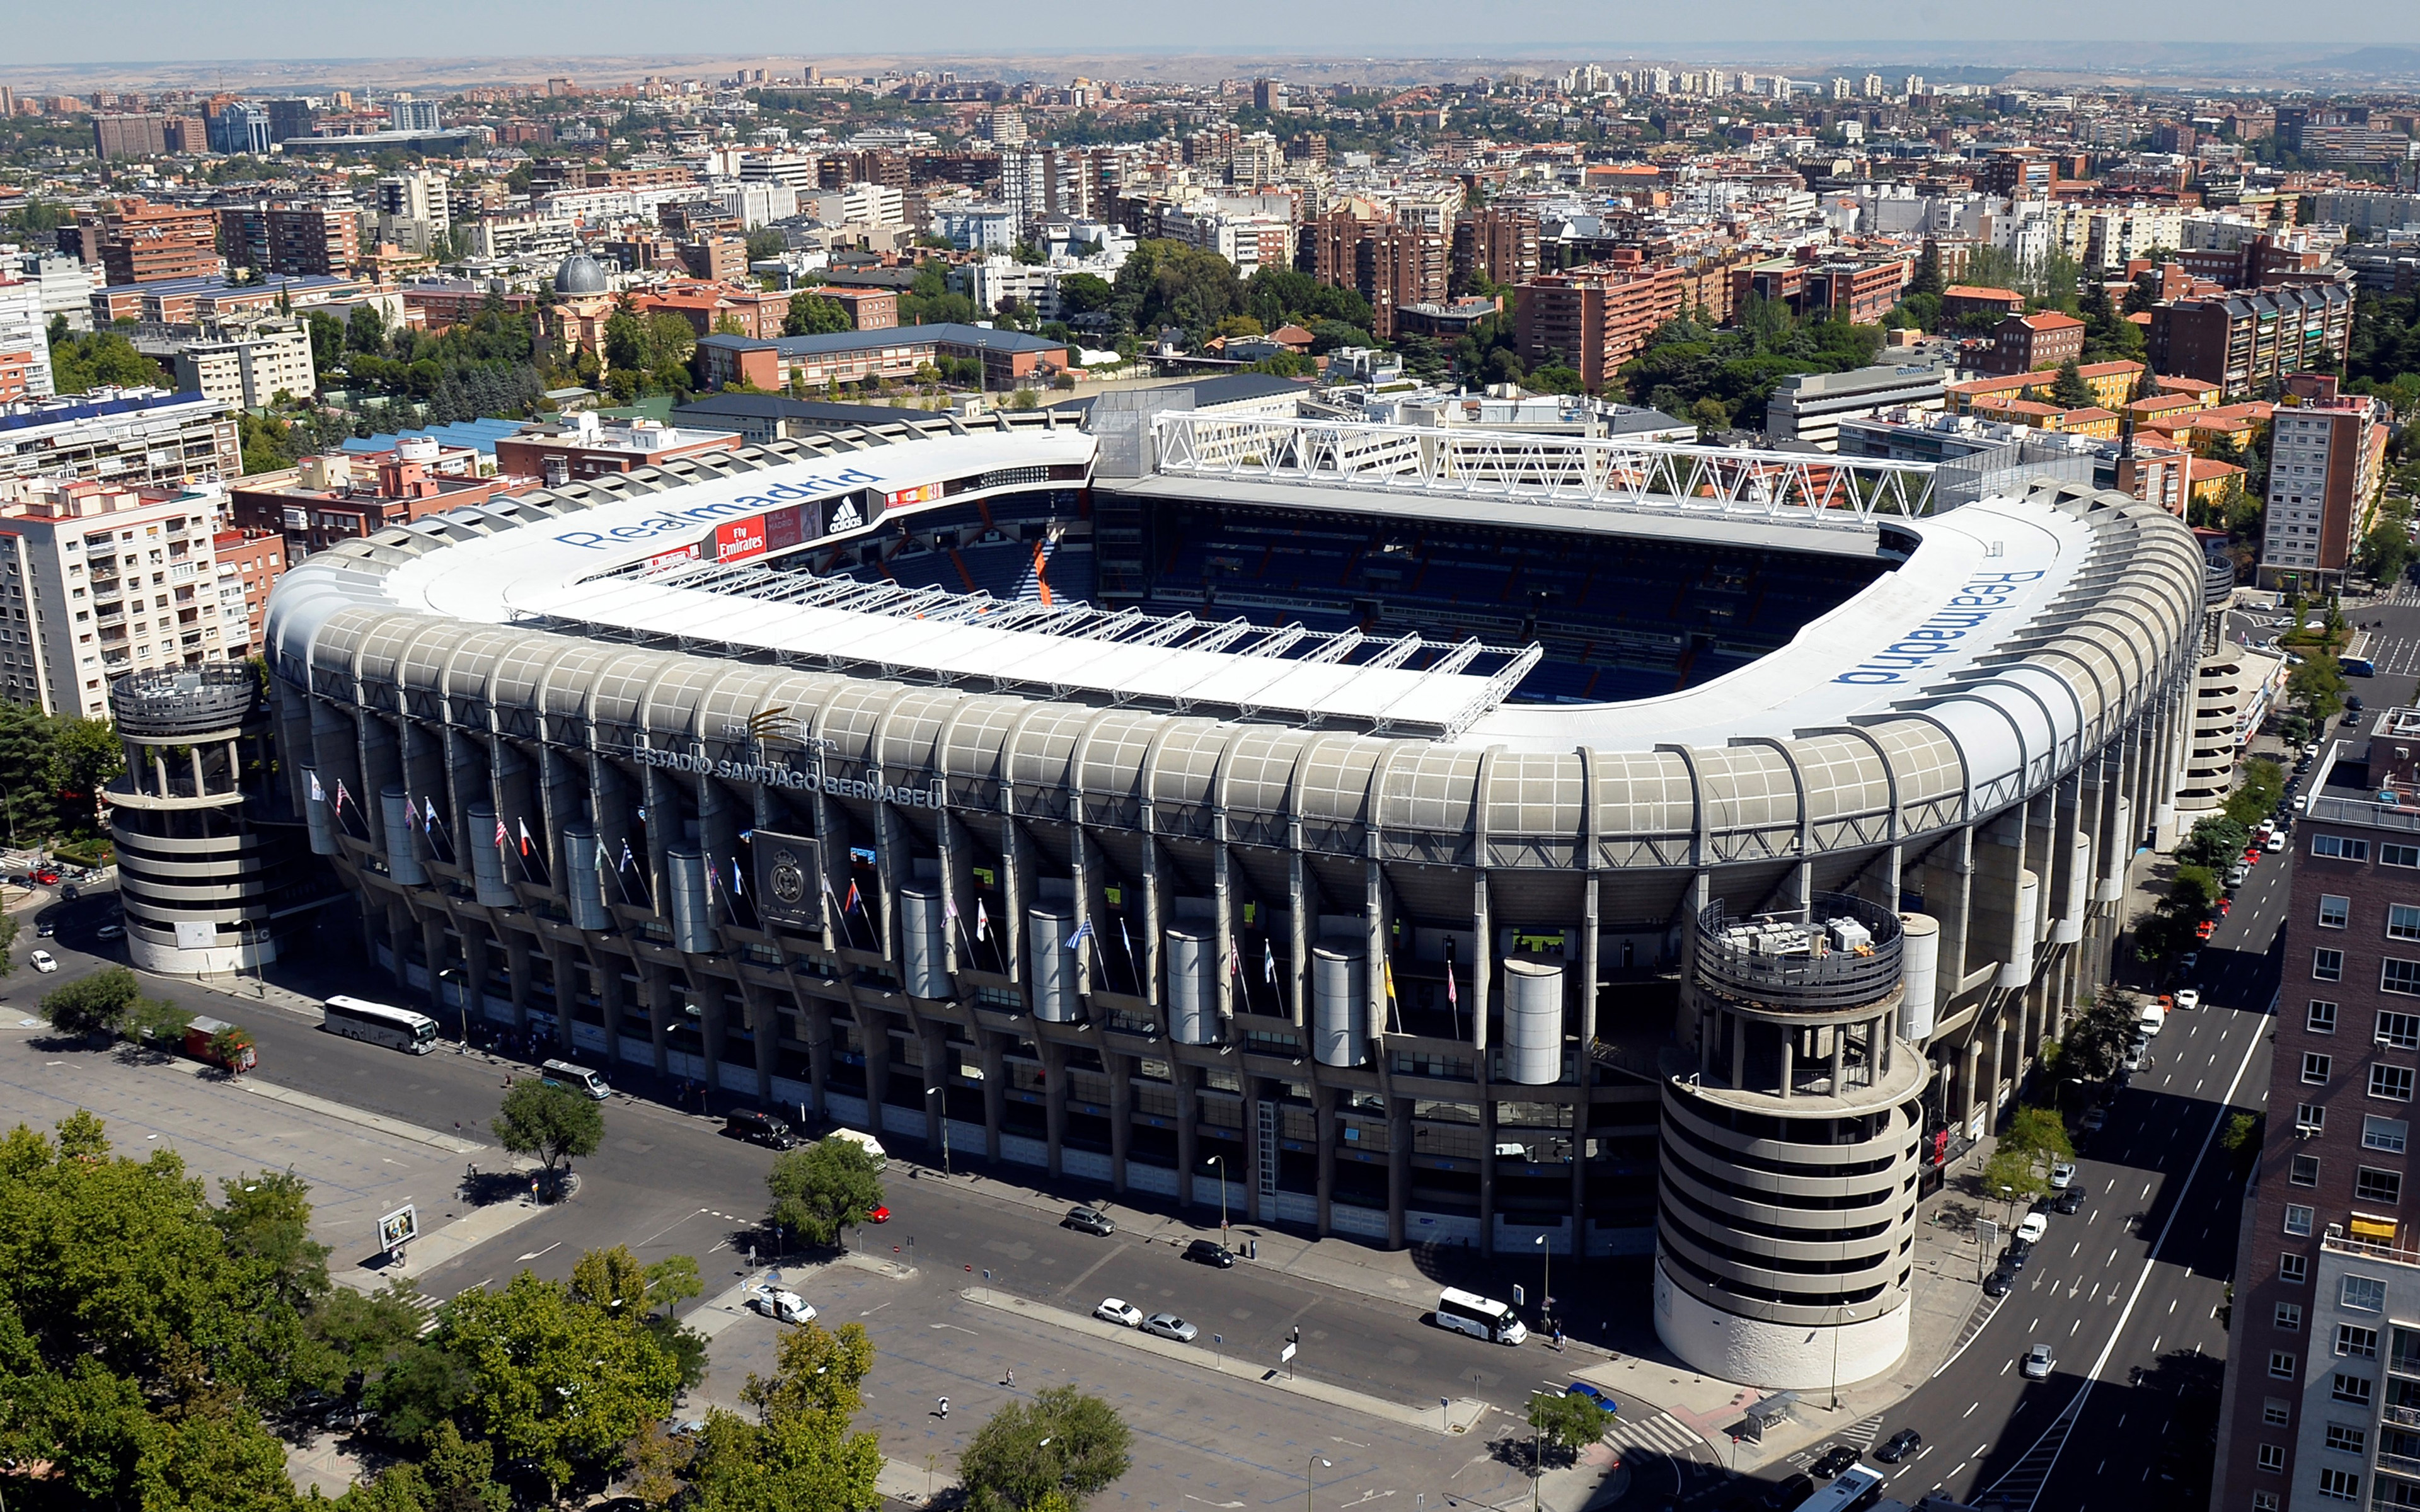 Download wallpaper Santiago Bernabeu Stadium, 4k, Madrid, Spain, football stadium, sports arena, Real Madrid for desktop with resolution 3840x2400. High Quality HD picture wallpaper